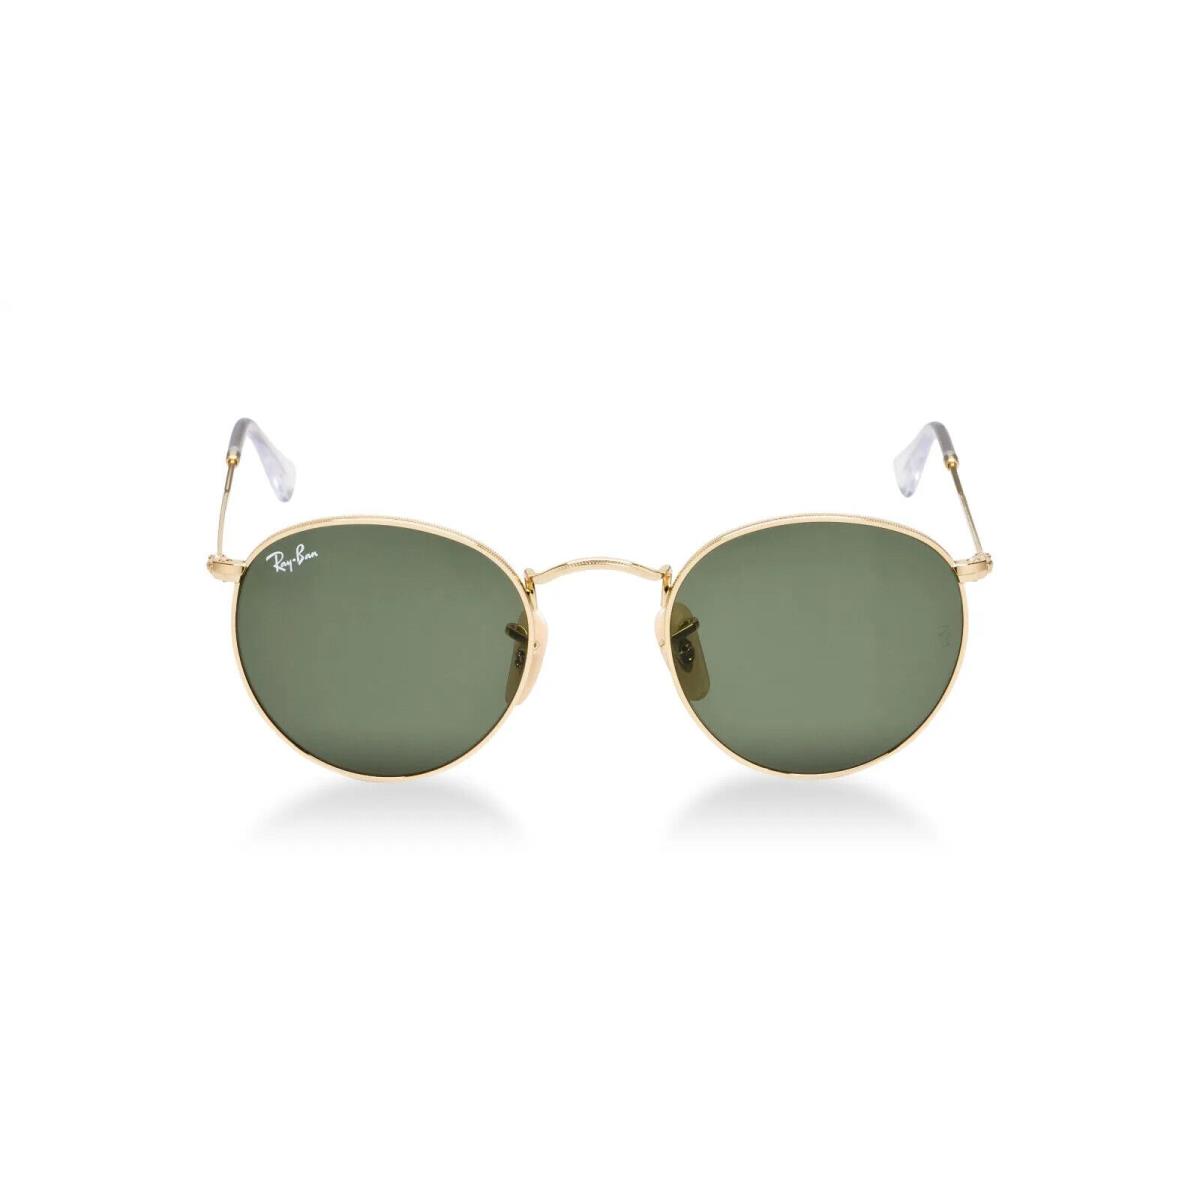 Ray-ban Unisex Round Metal Gold Frame G-15 Sunglasses RB3447 001